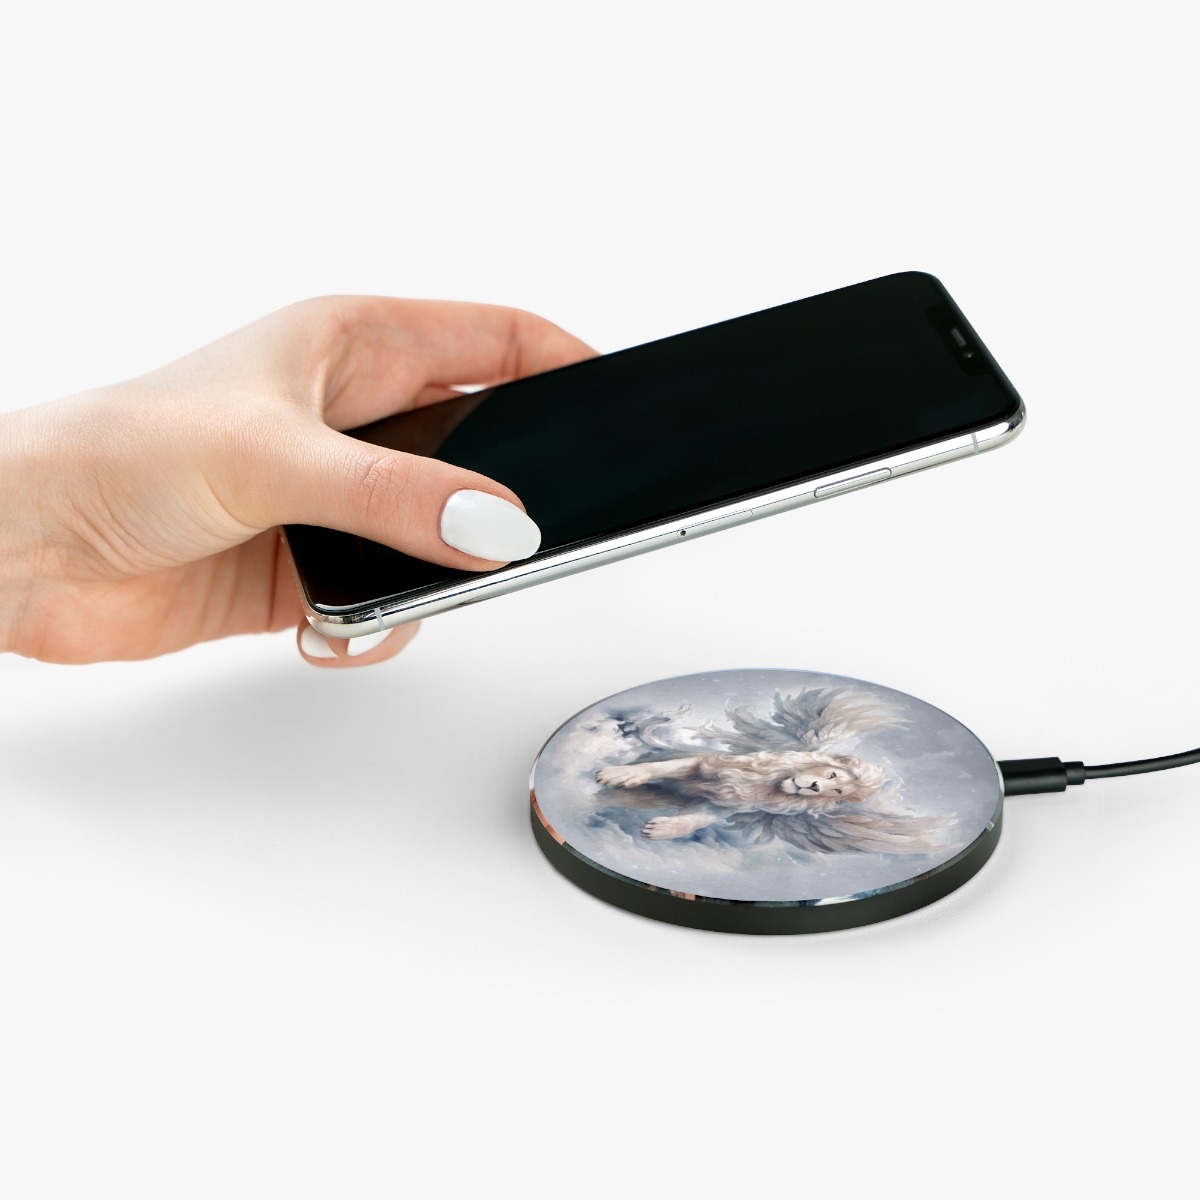 Winged Lion Wireless Charger